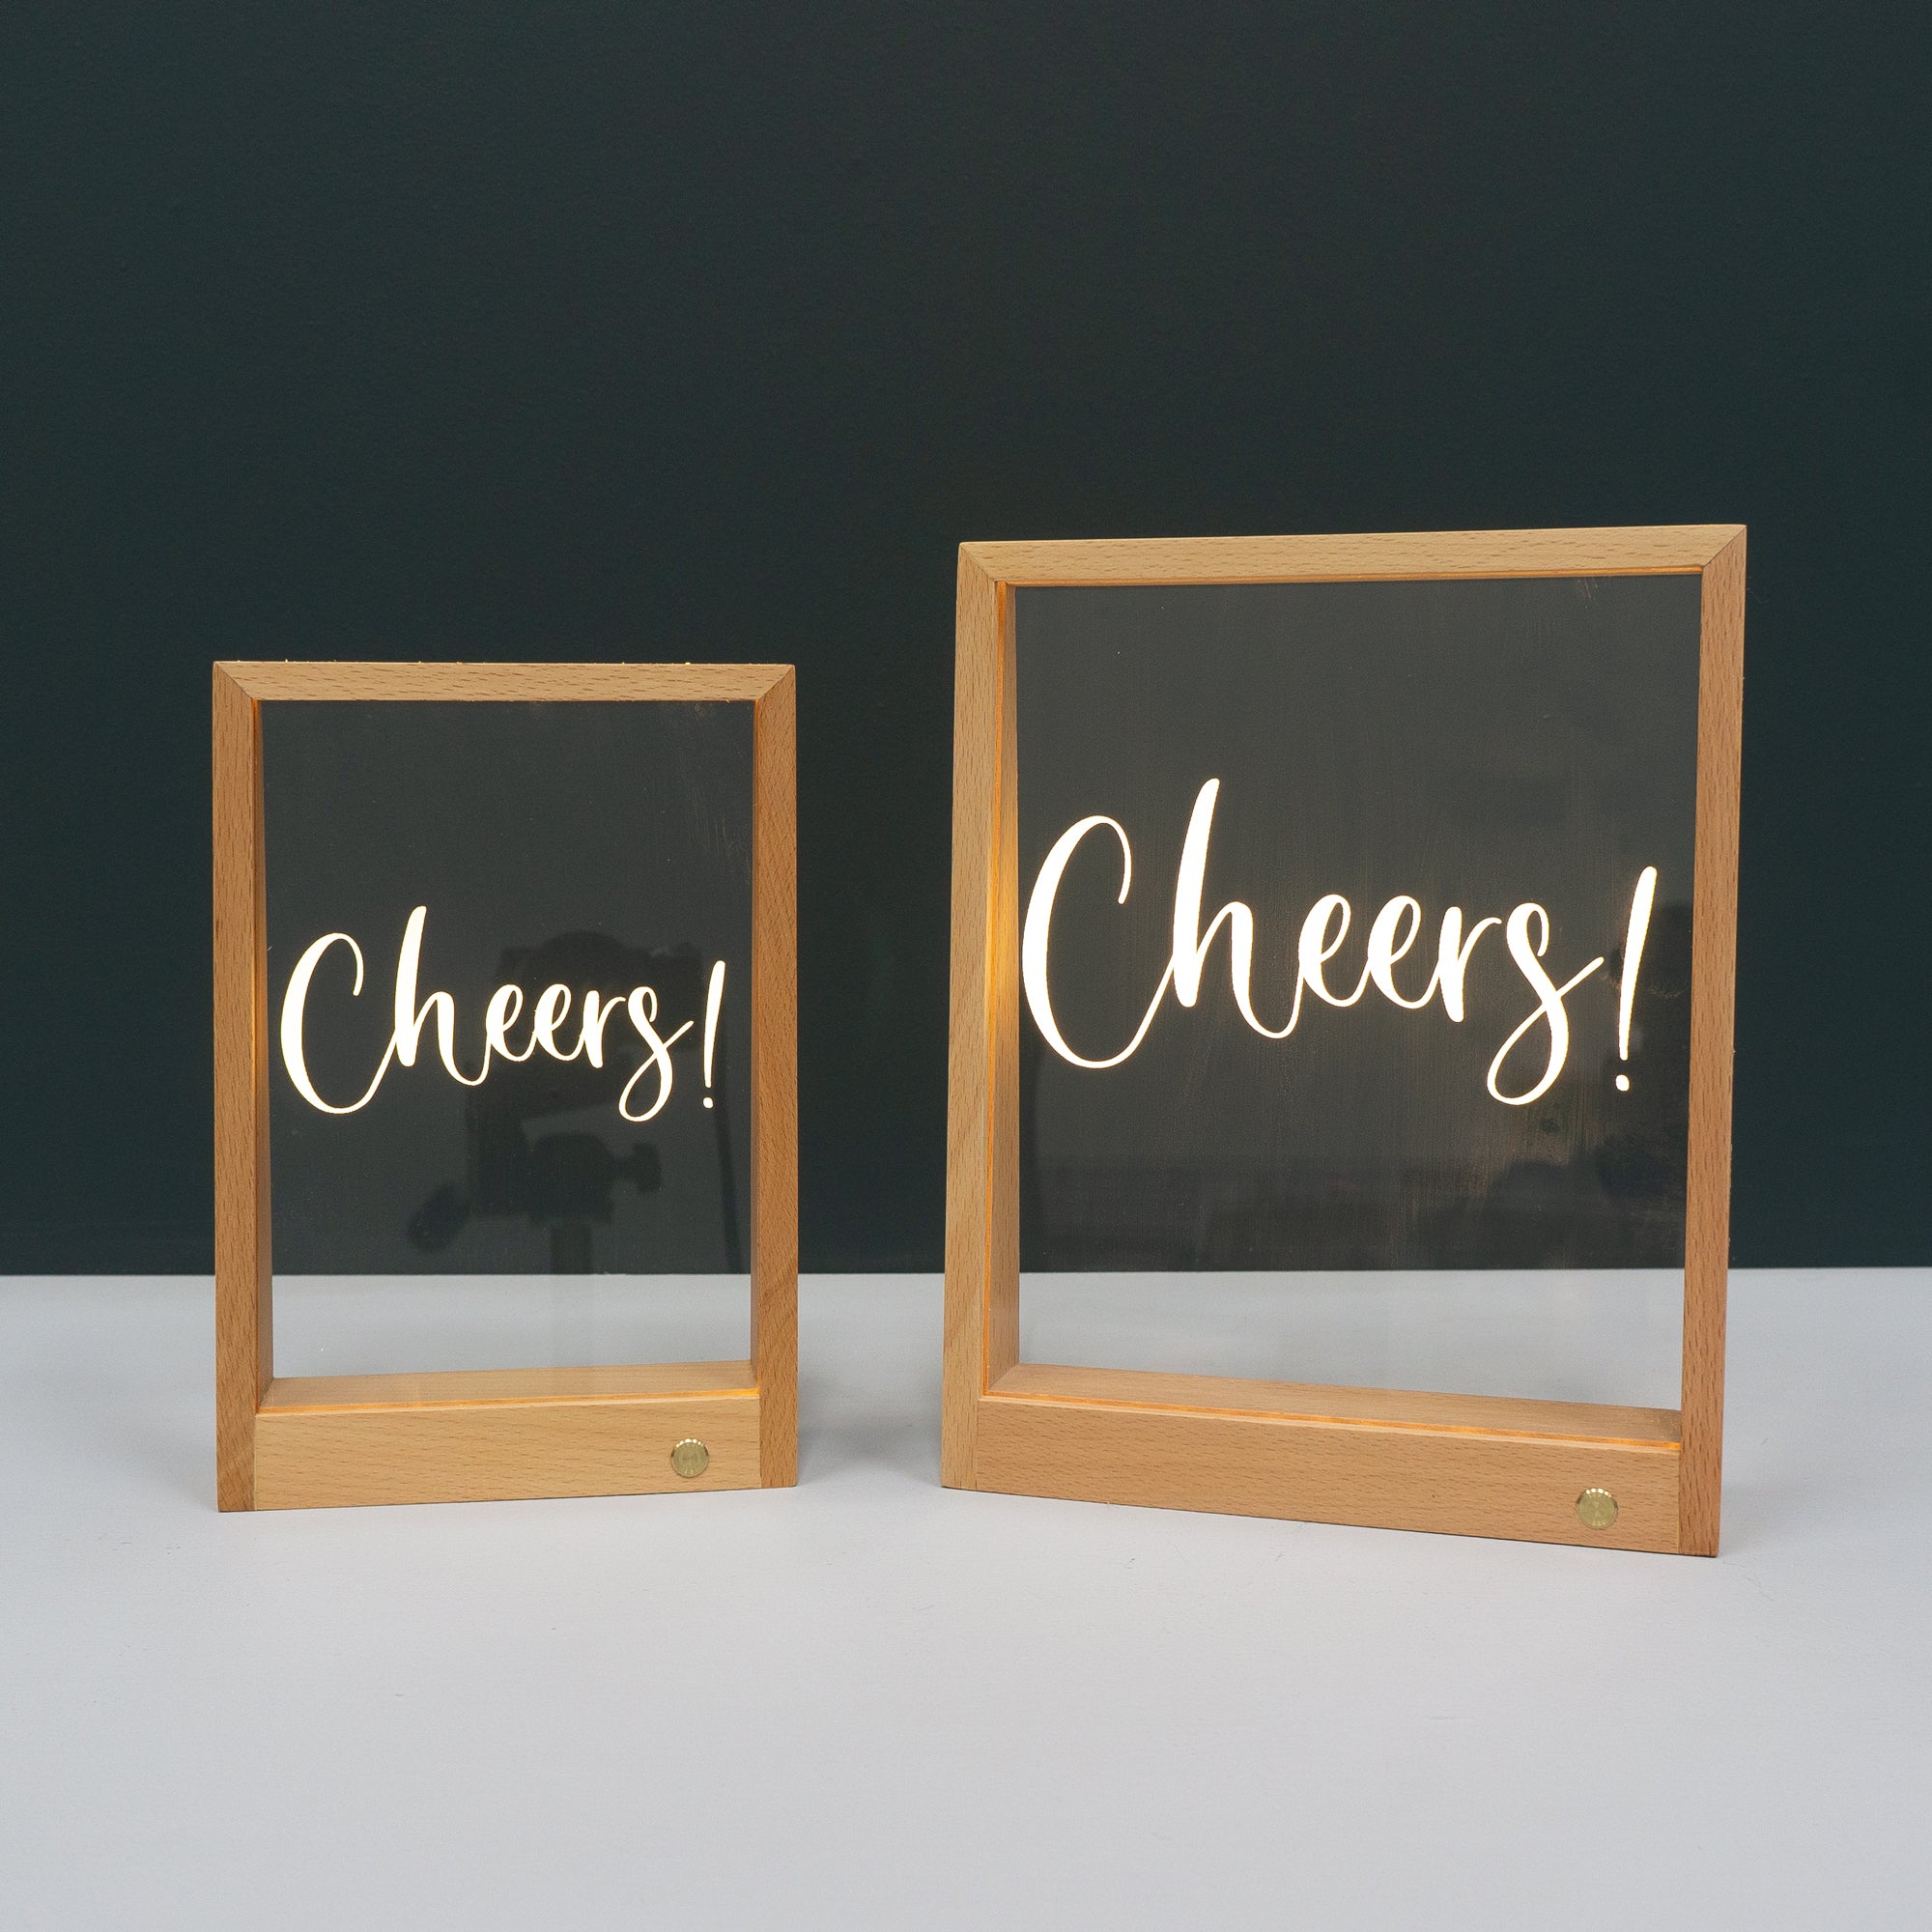 Wireless Cheers! light up LED quote bar sign